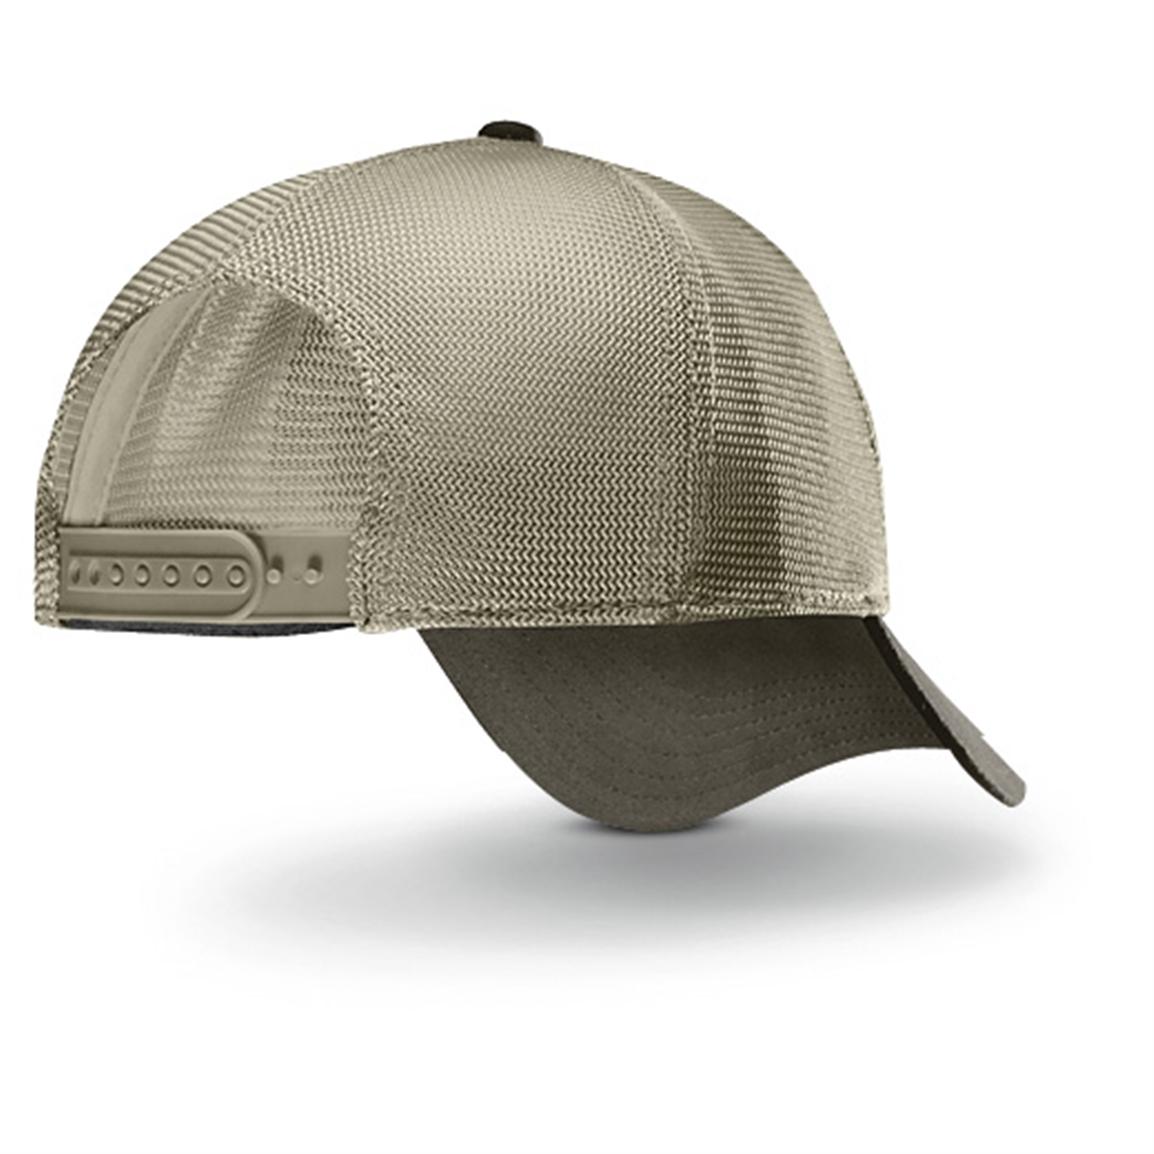 Under Armour® Fish Hook Patch Hat 424737, Hats & Caps at